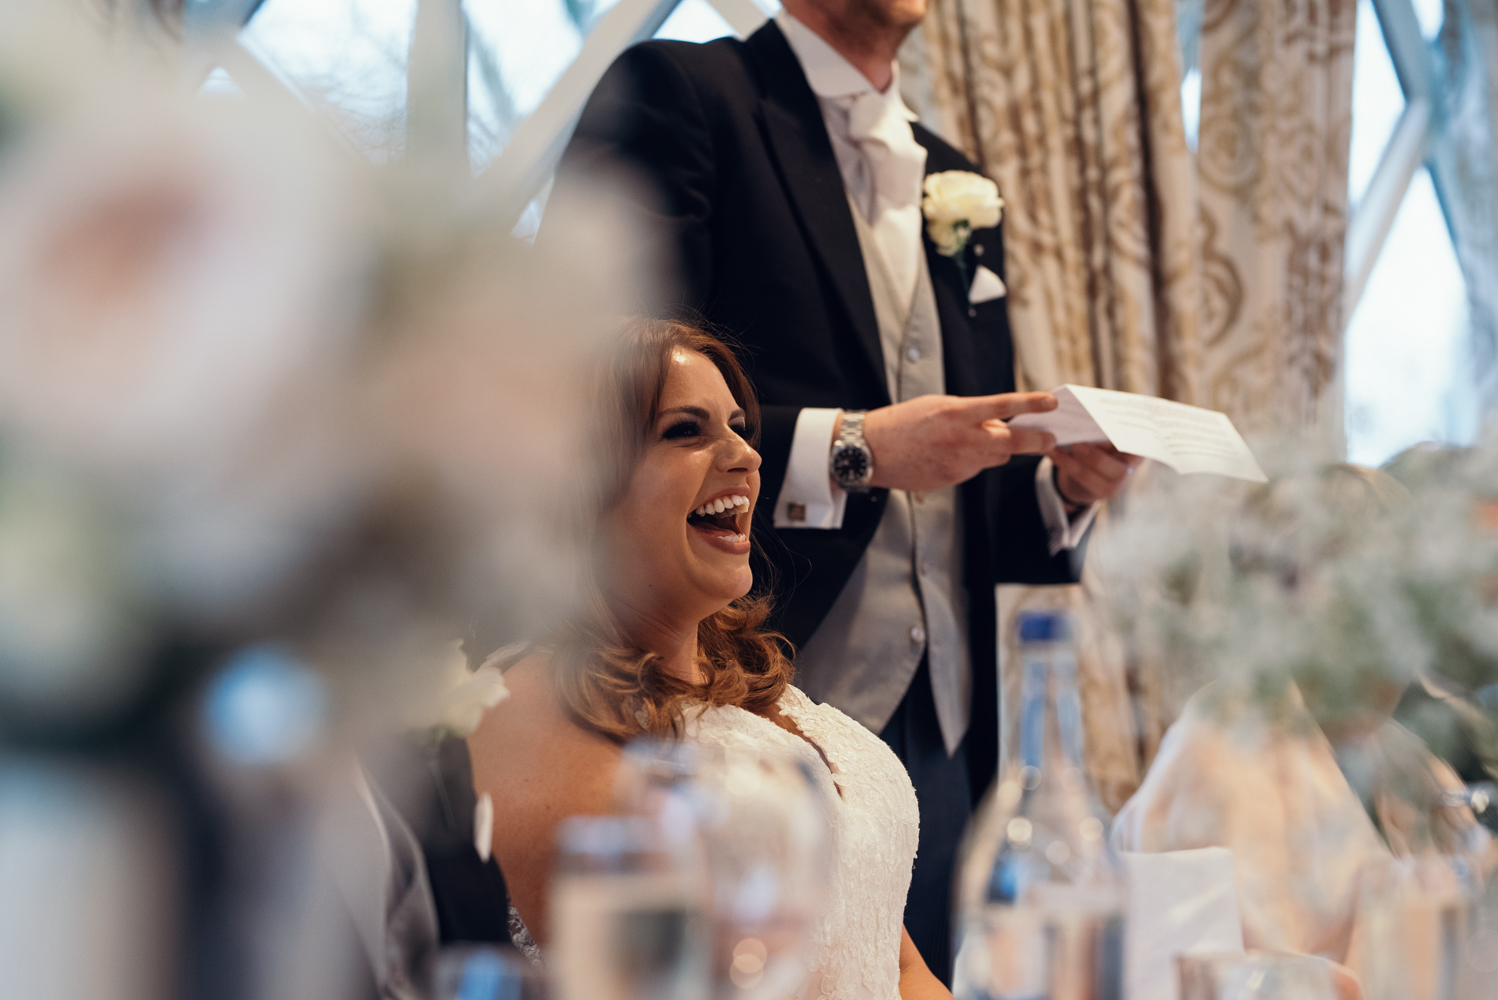 The bride laughing at one of the grooms joke during the speeches